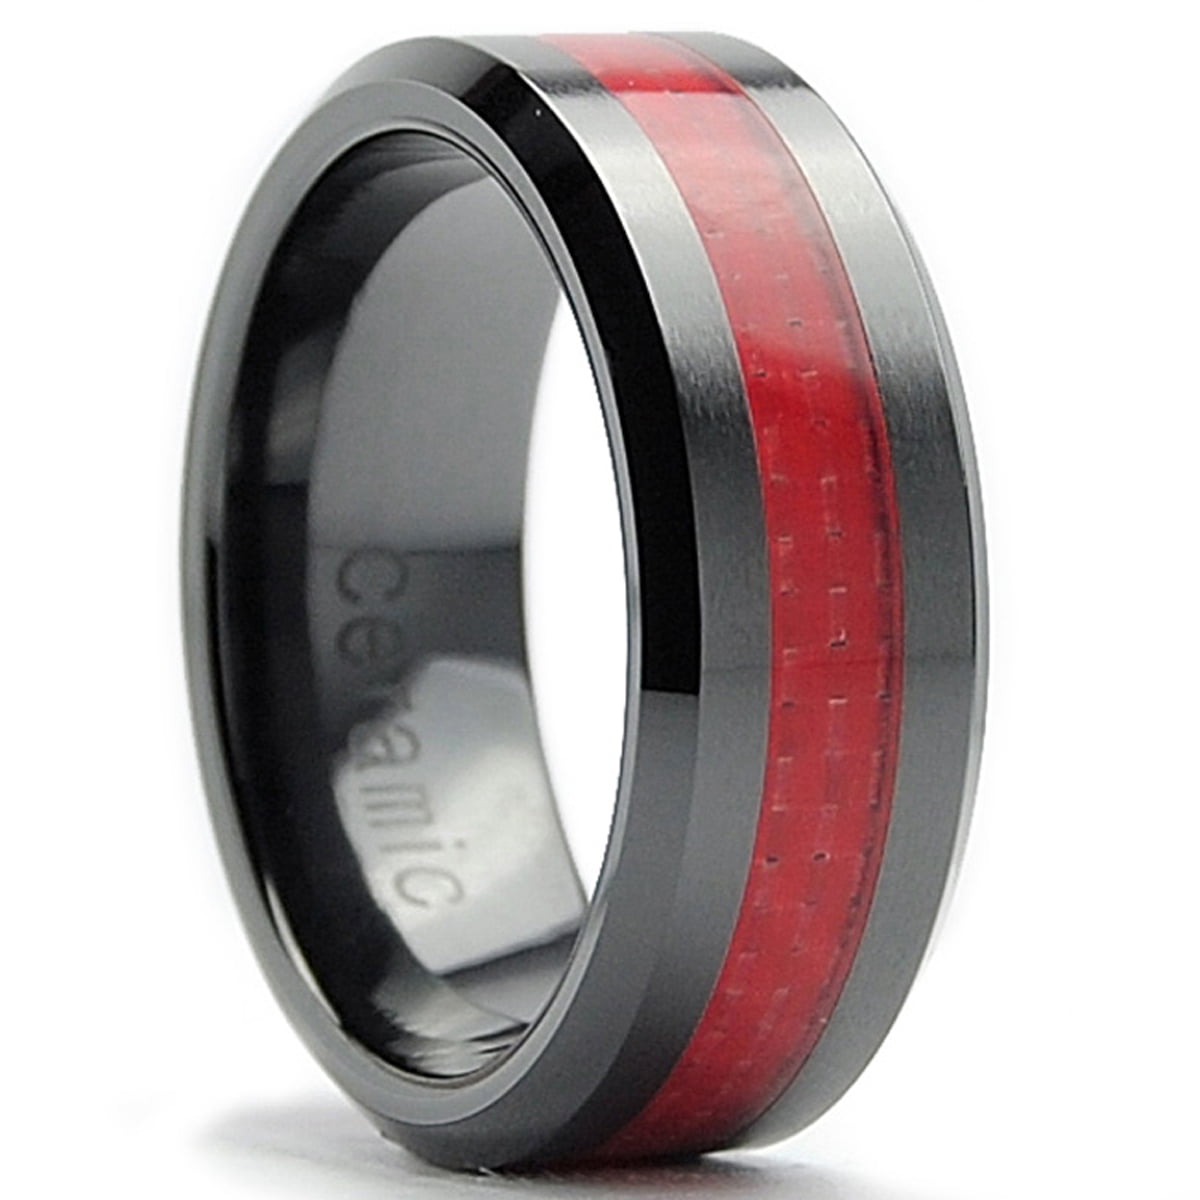 Comfort Fit Ceramic 8mm Wedding Band Ring with Black and Red Carbon Fiber Inlay 